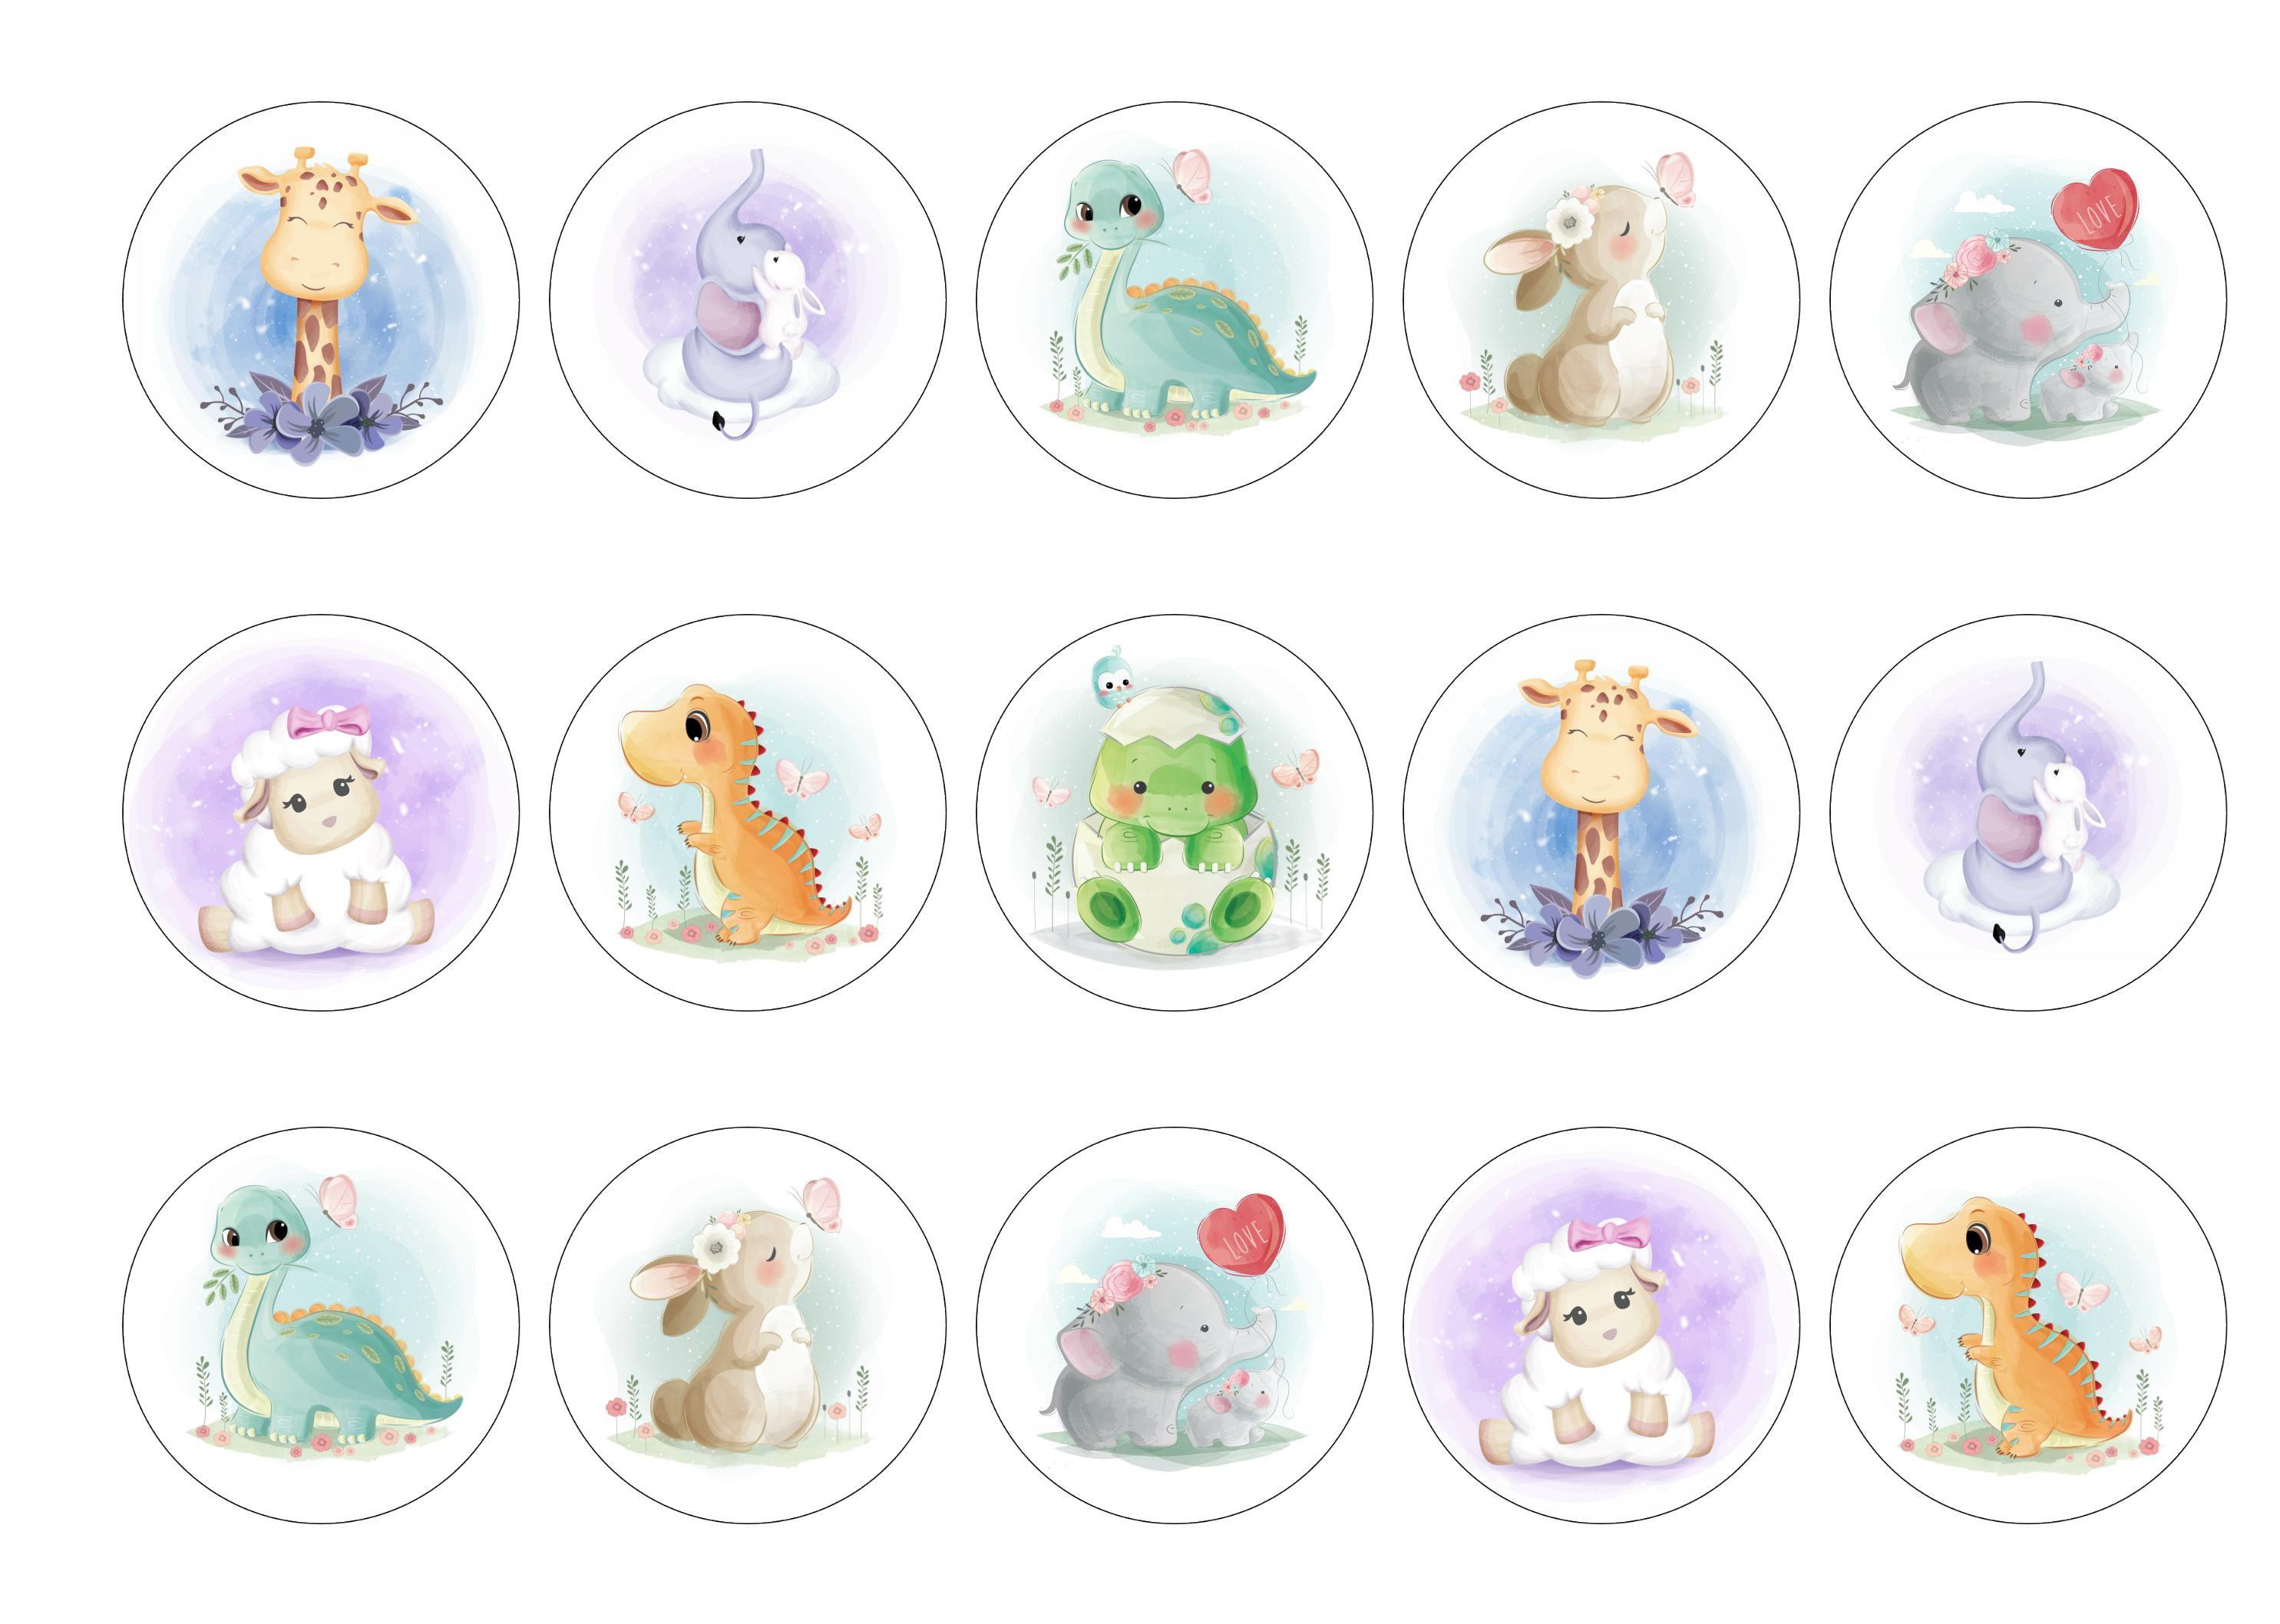 15 cupcake toppers with various baby animal images